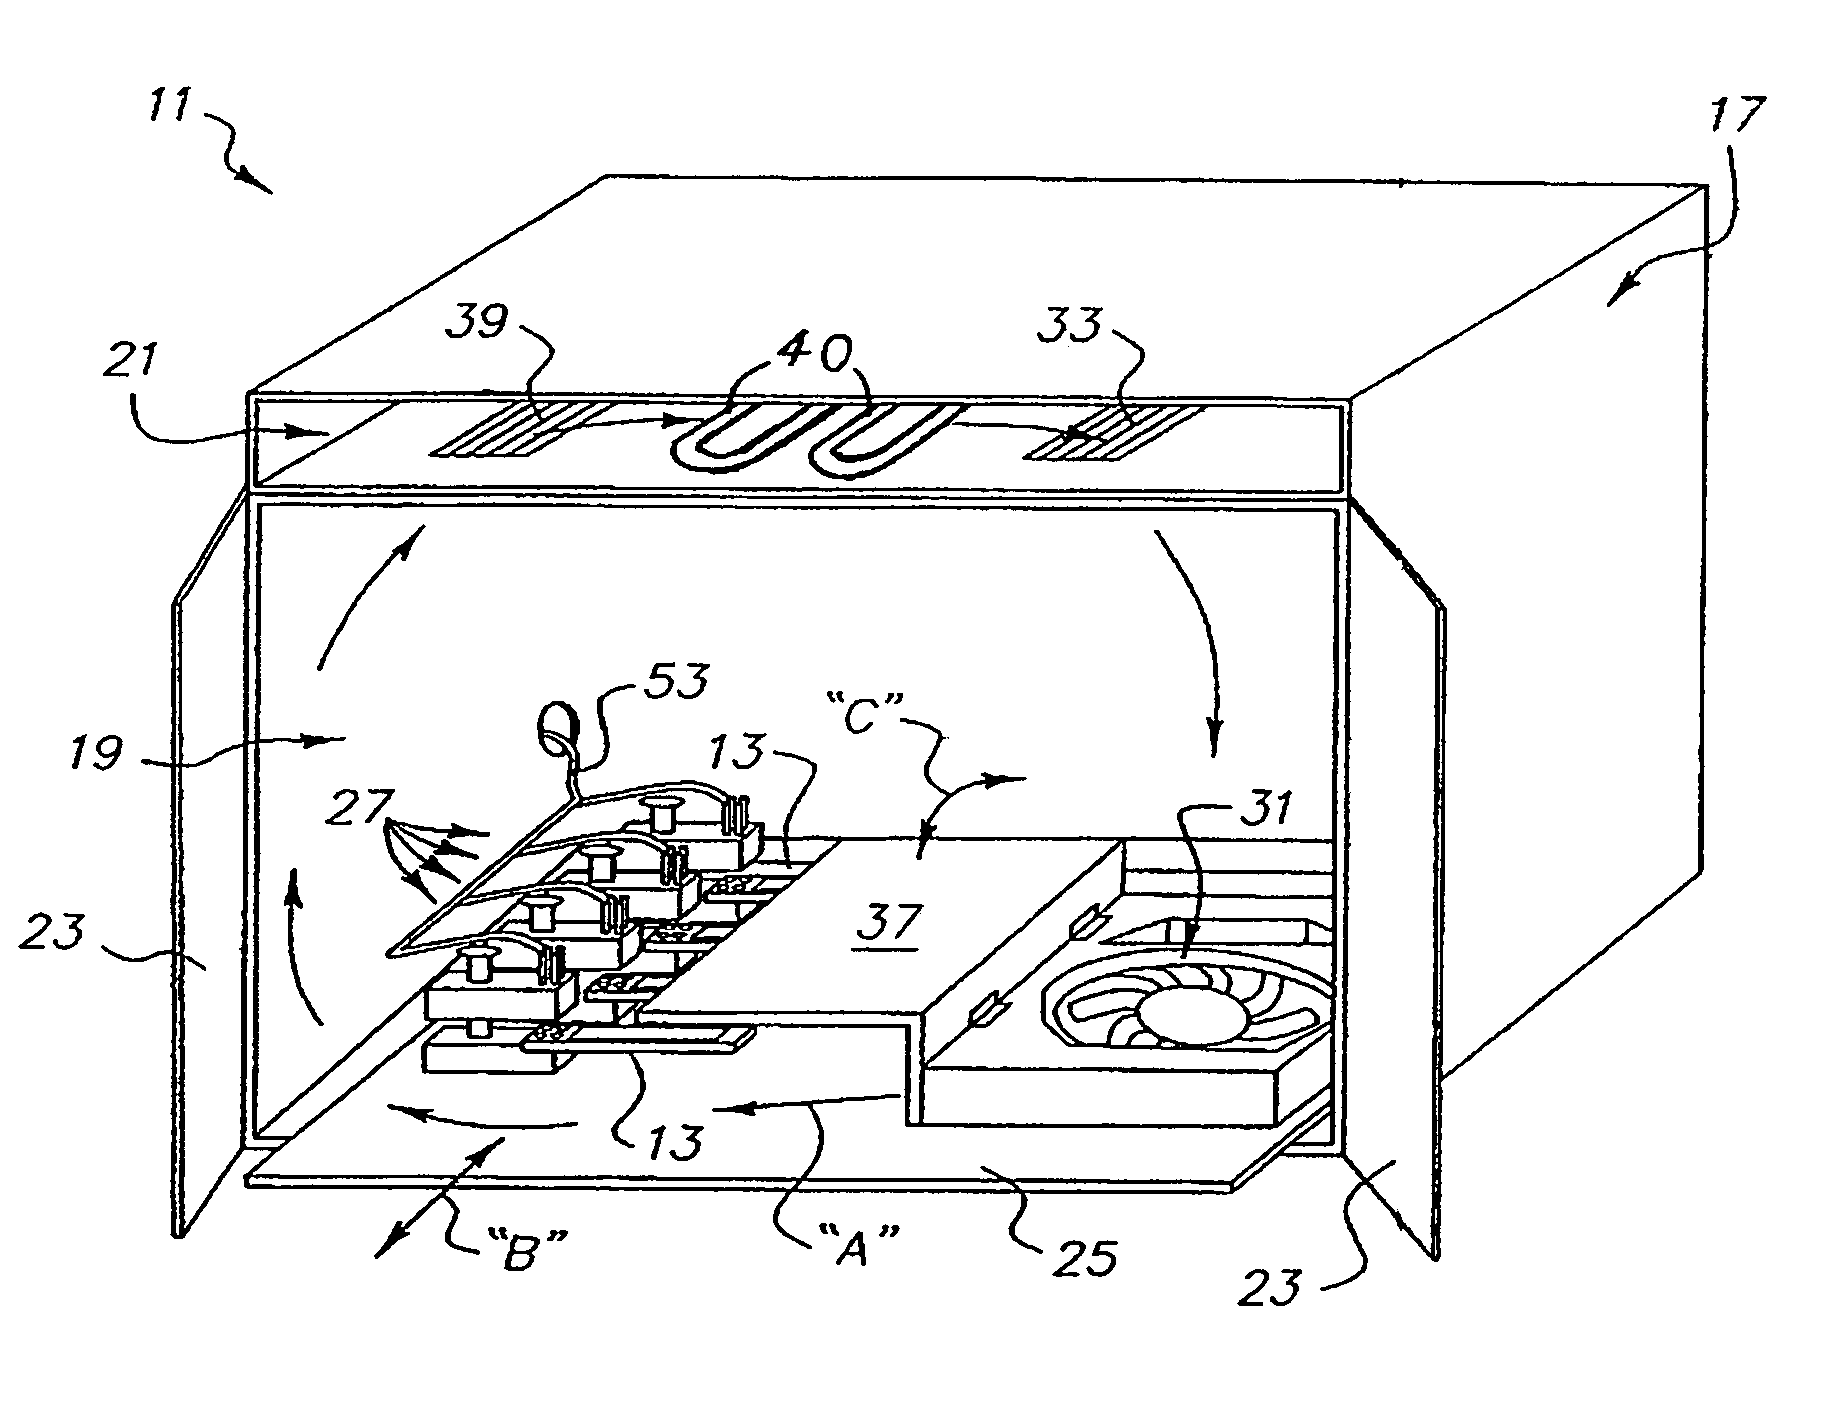 Substrate test apparatus and method of testing substrates